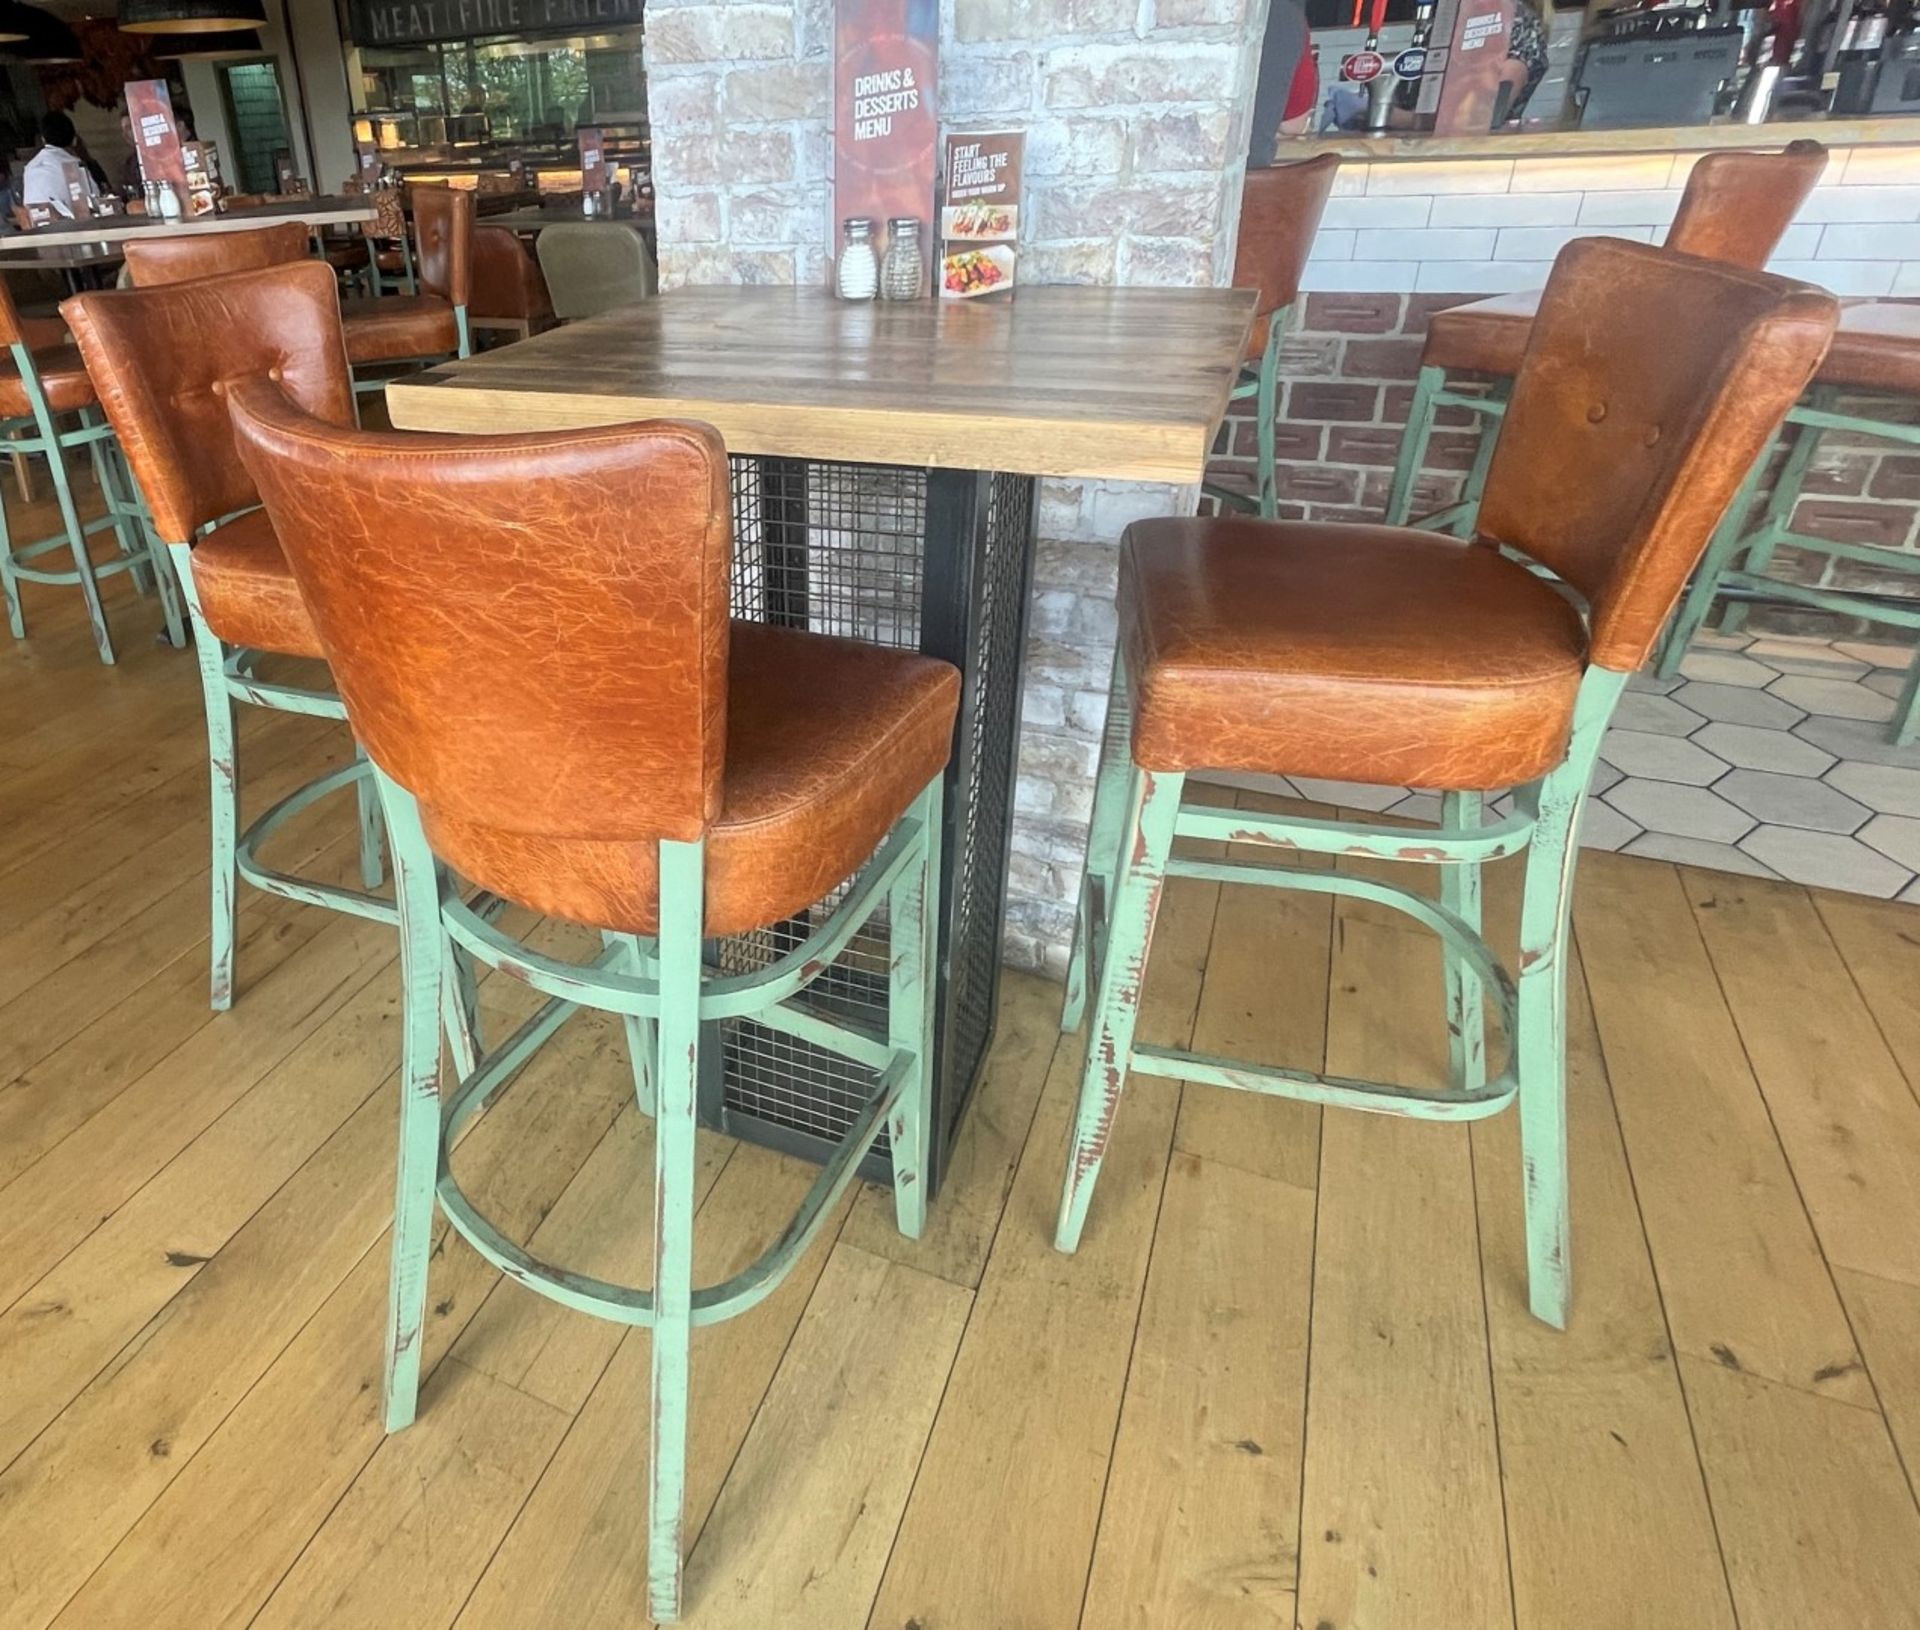 4 x Commercial Restaurant Bar Stools Featuring Wooden Frames With a Distressed Finish and Tan - Image 10 of 15